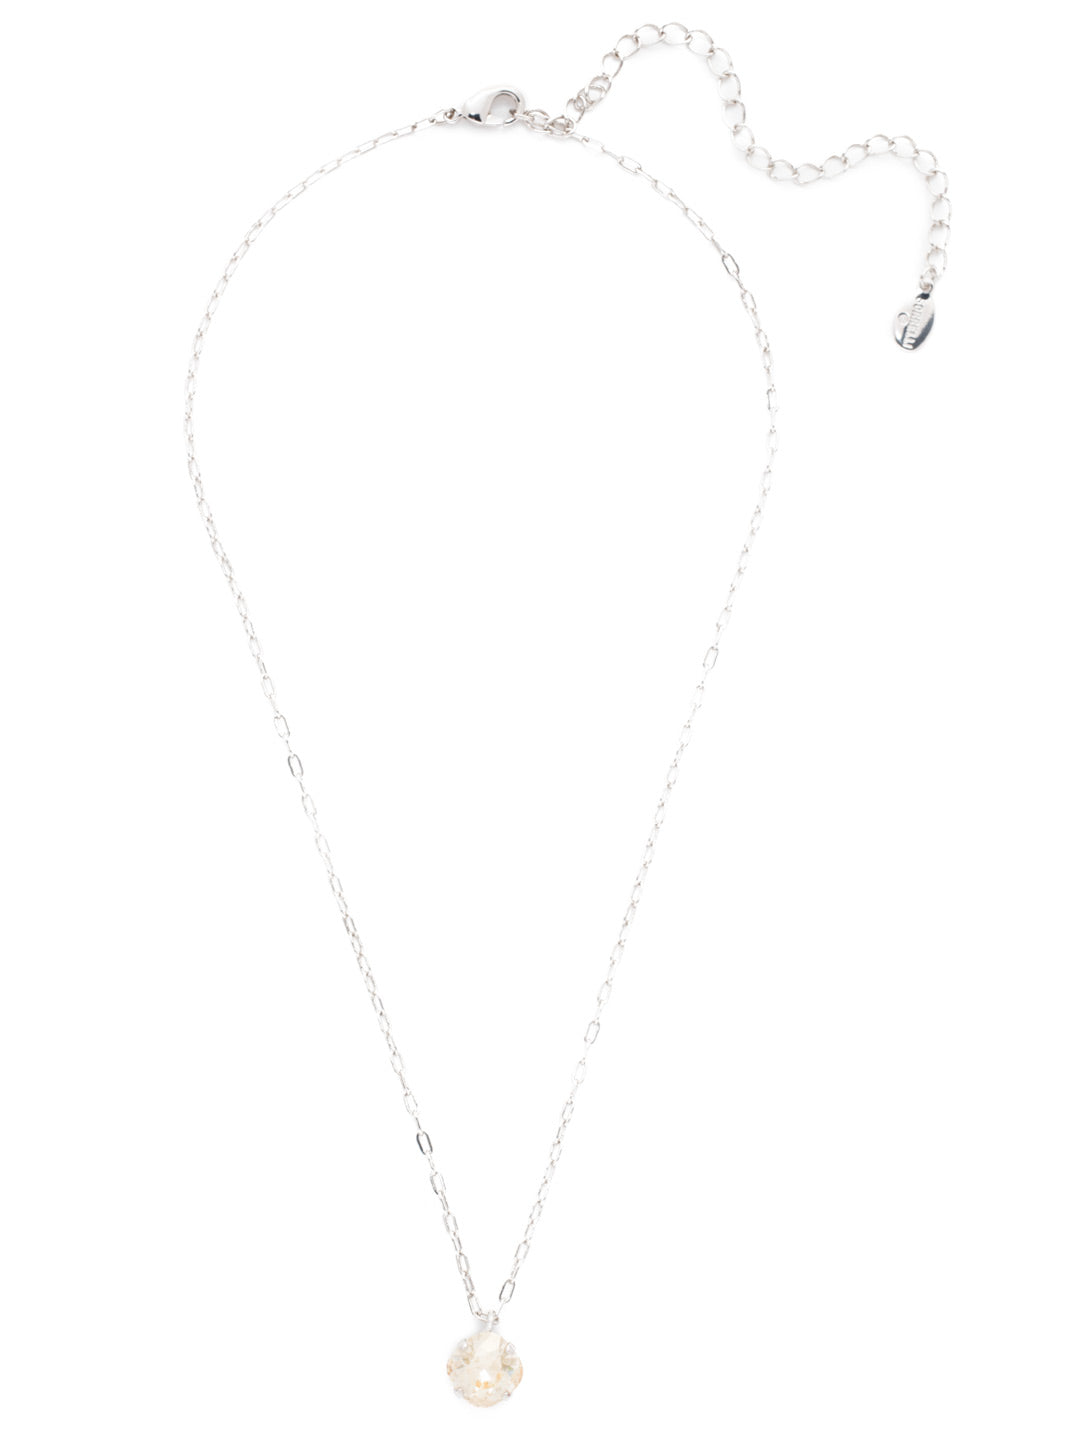 Siren Pendant Necklace - NEP22RHCCH - <p>With a cushion-cut crystal and delicate chain, the Siren Pendant  will add a litle sparkle to your everyday look. From Sorrelli's Crystal Champagne collection in our Palladium Silver-tone finish.</p>